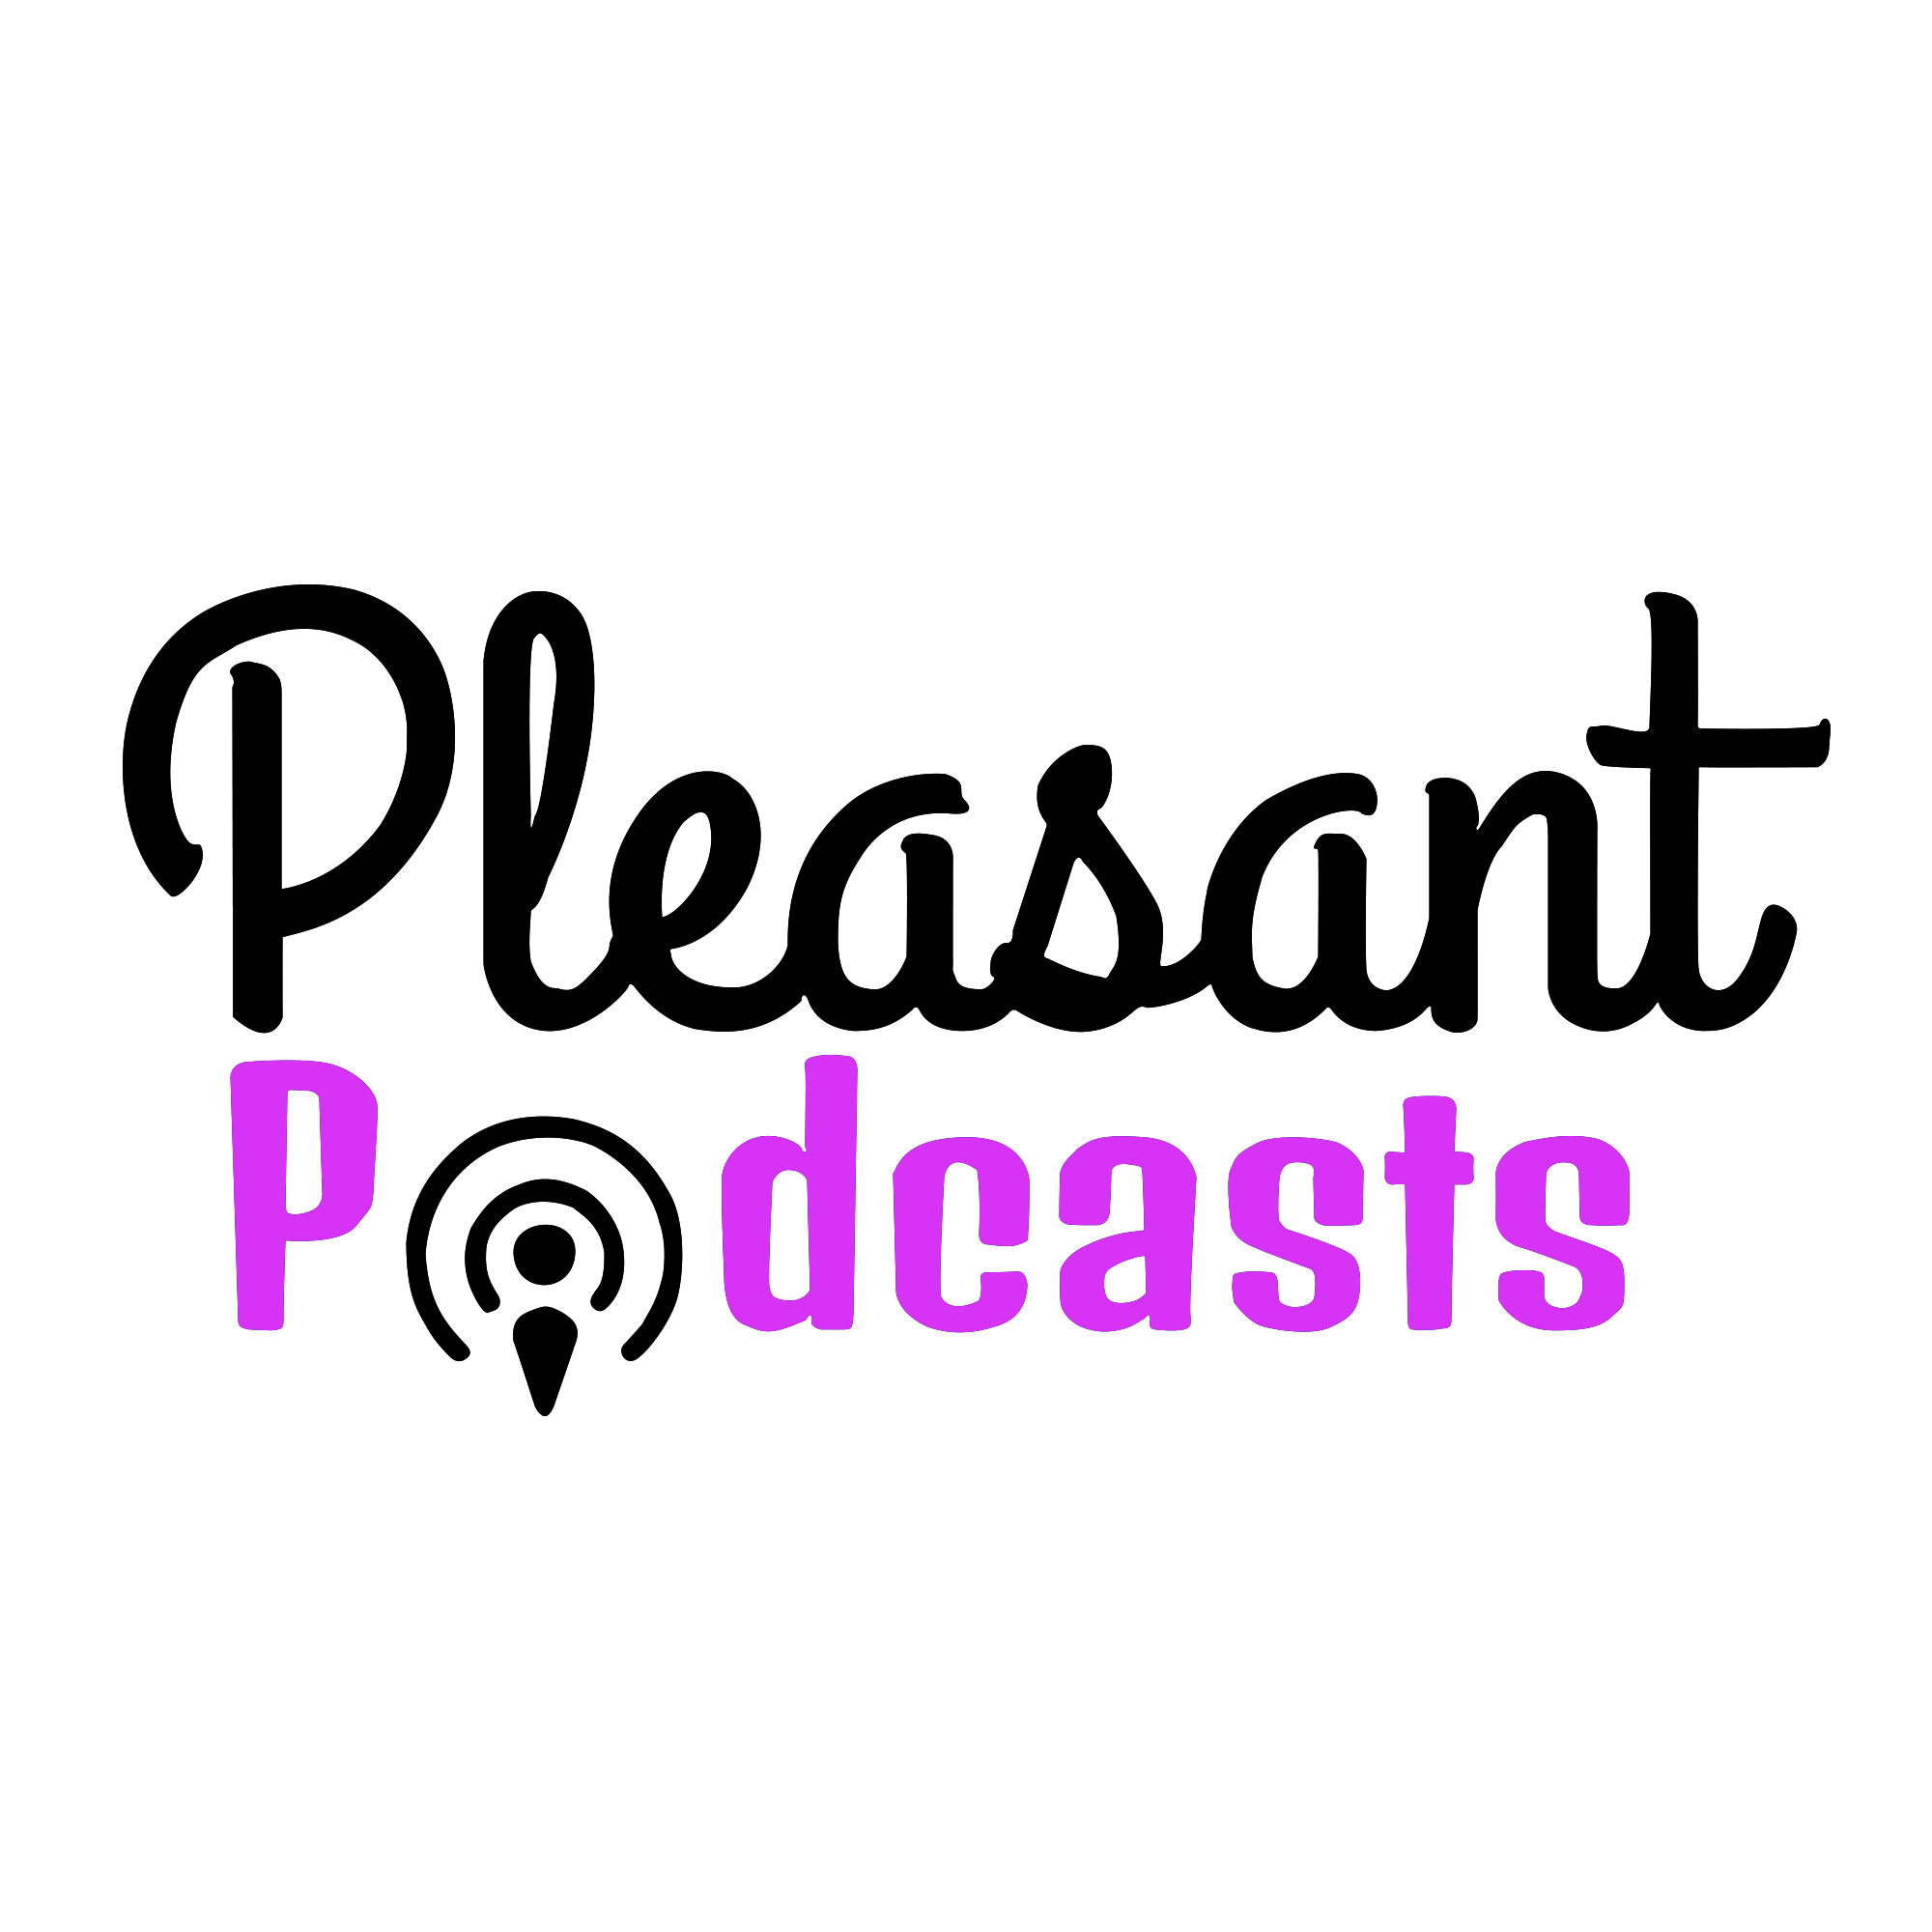 Pleasant Podcasts